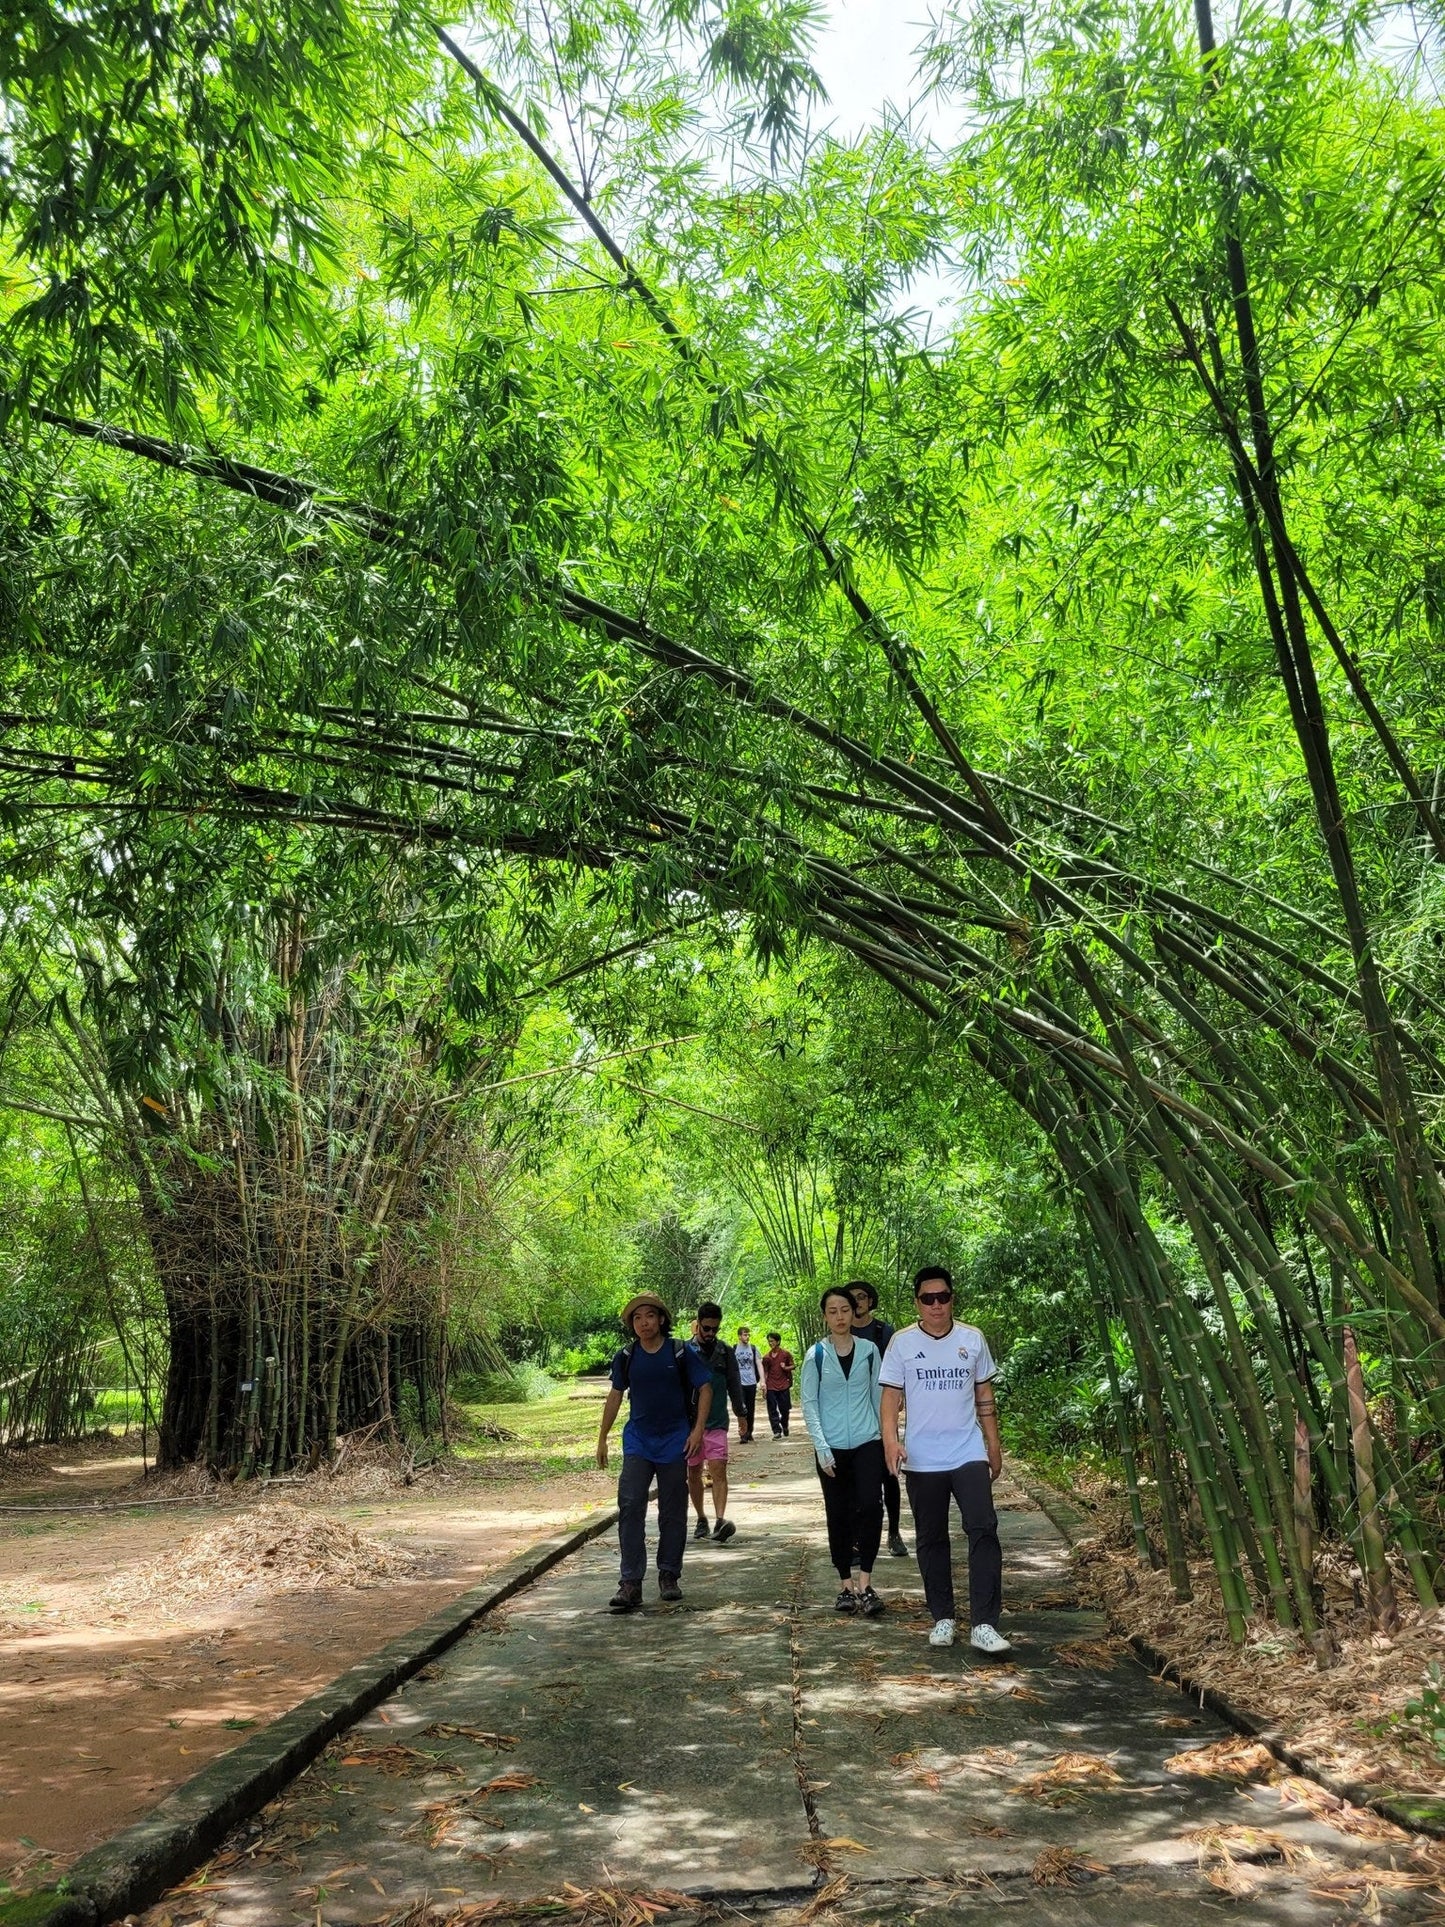 75B: Bamboo Village: Lost In The Peaceful Countryside, Dau Tieng Lake, The Cu Chi Region